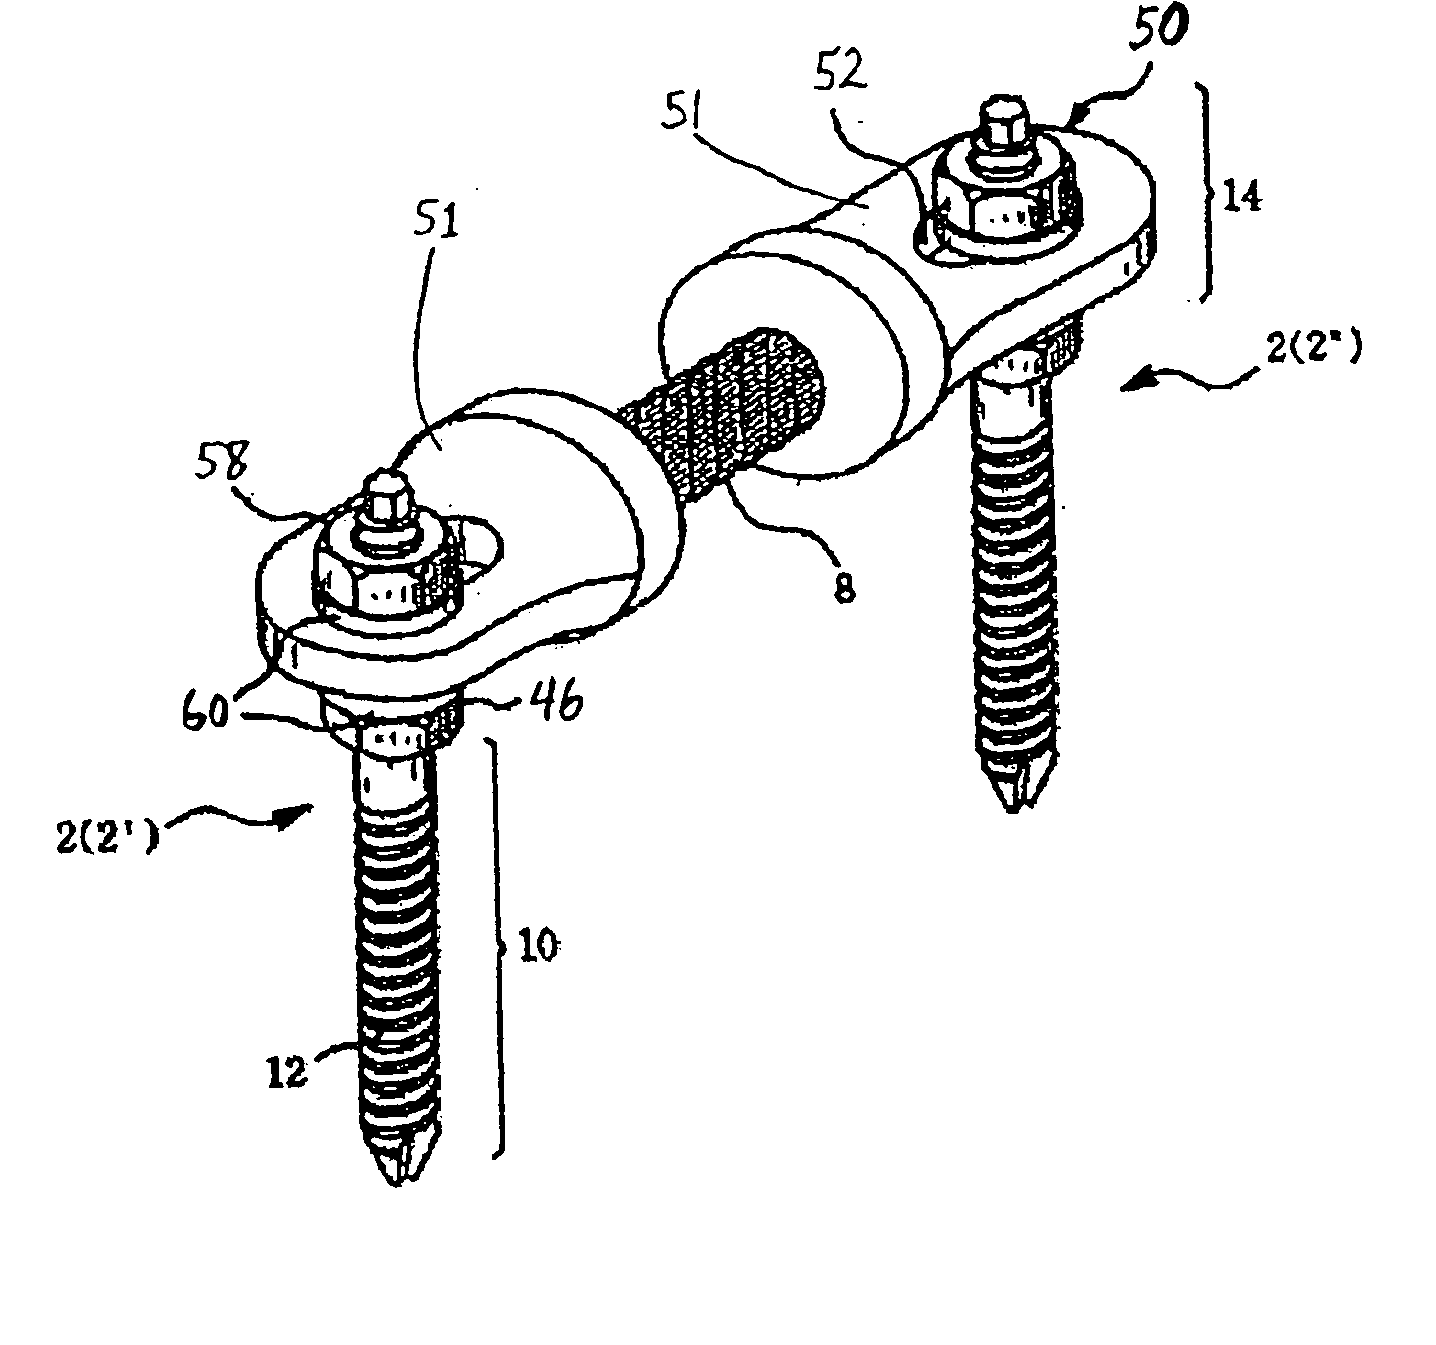 Method and apparatus for flexible fixation of a spine